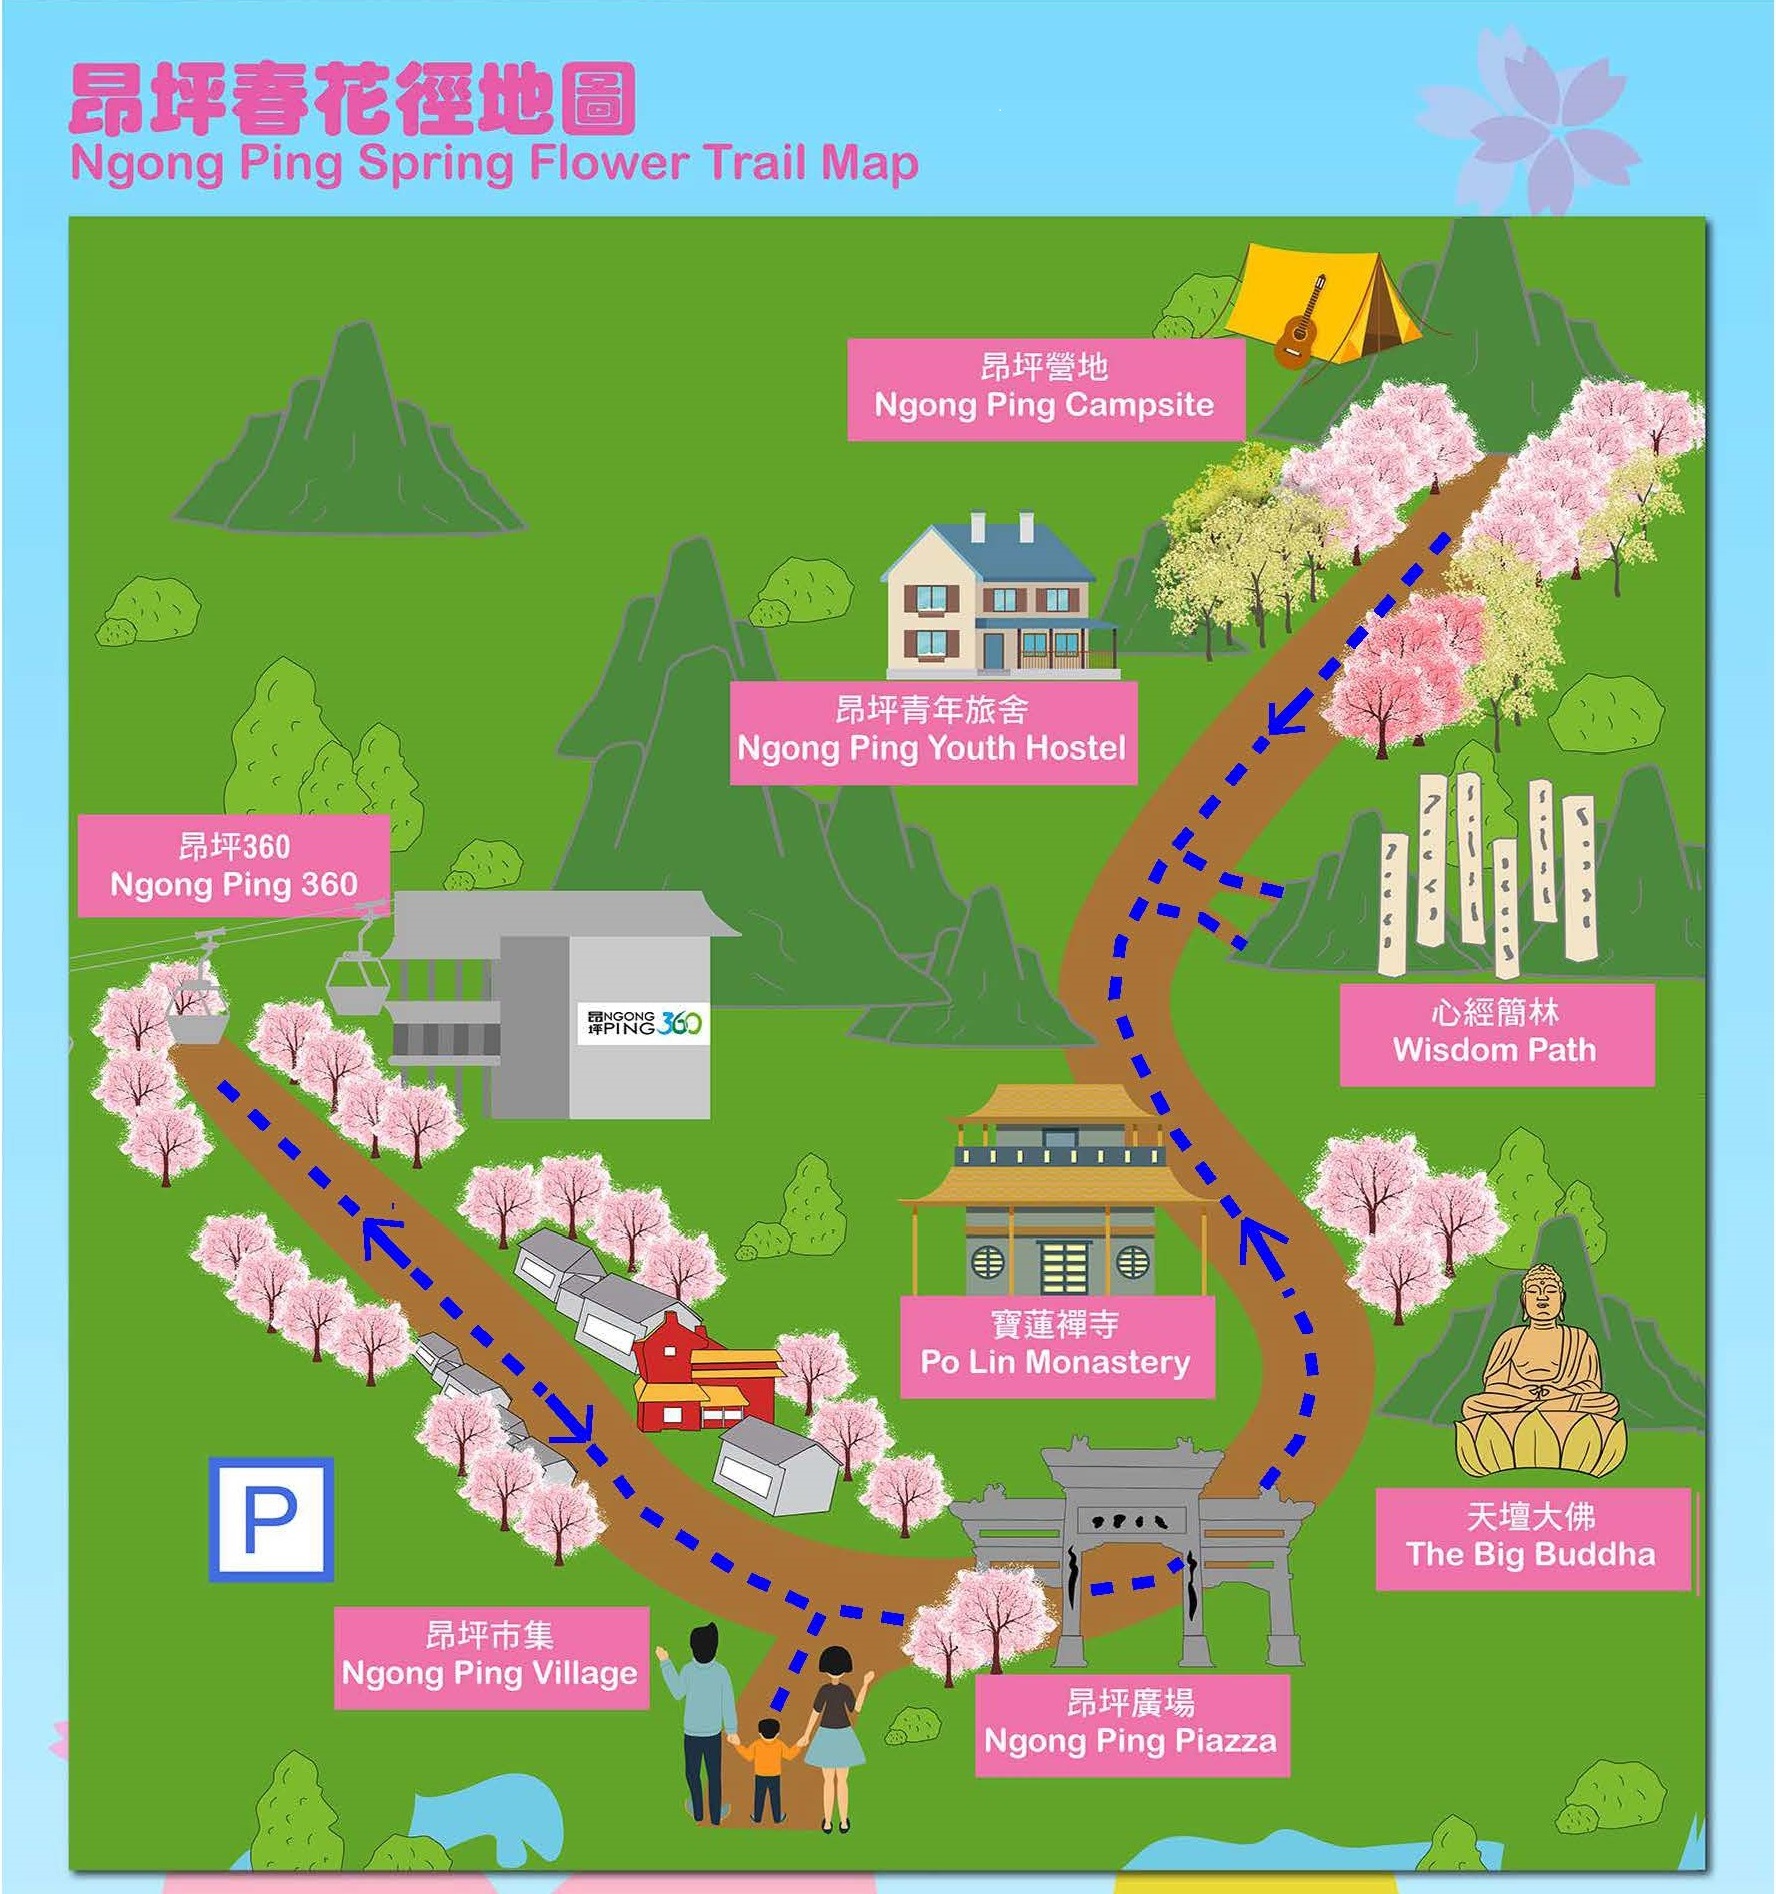 Ngong Ping Spring Flower Trail Map